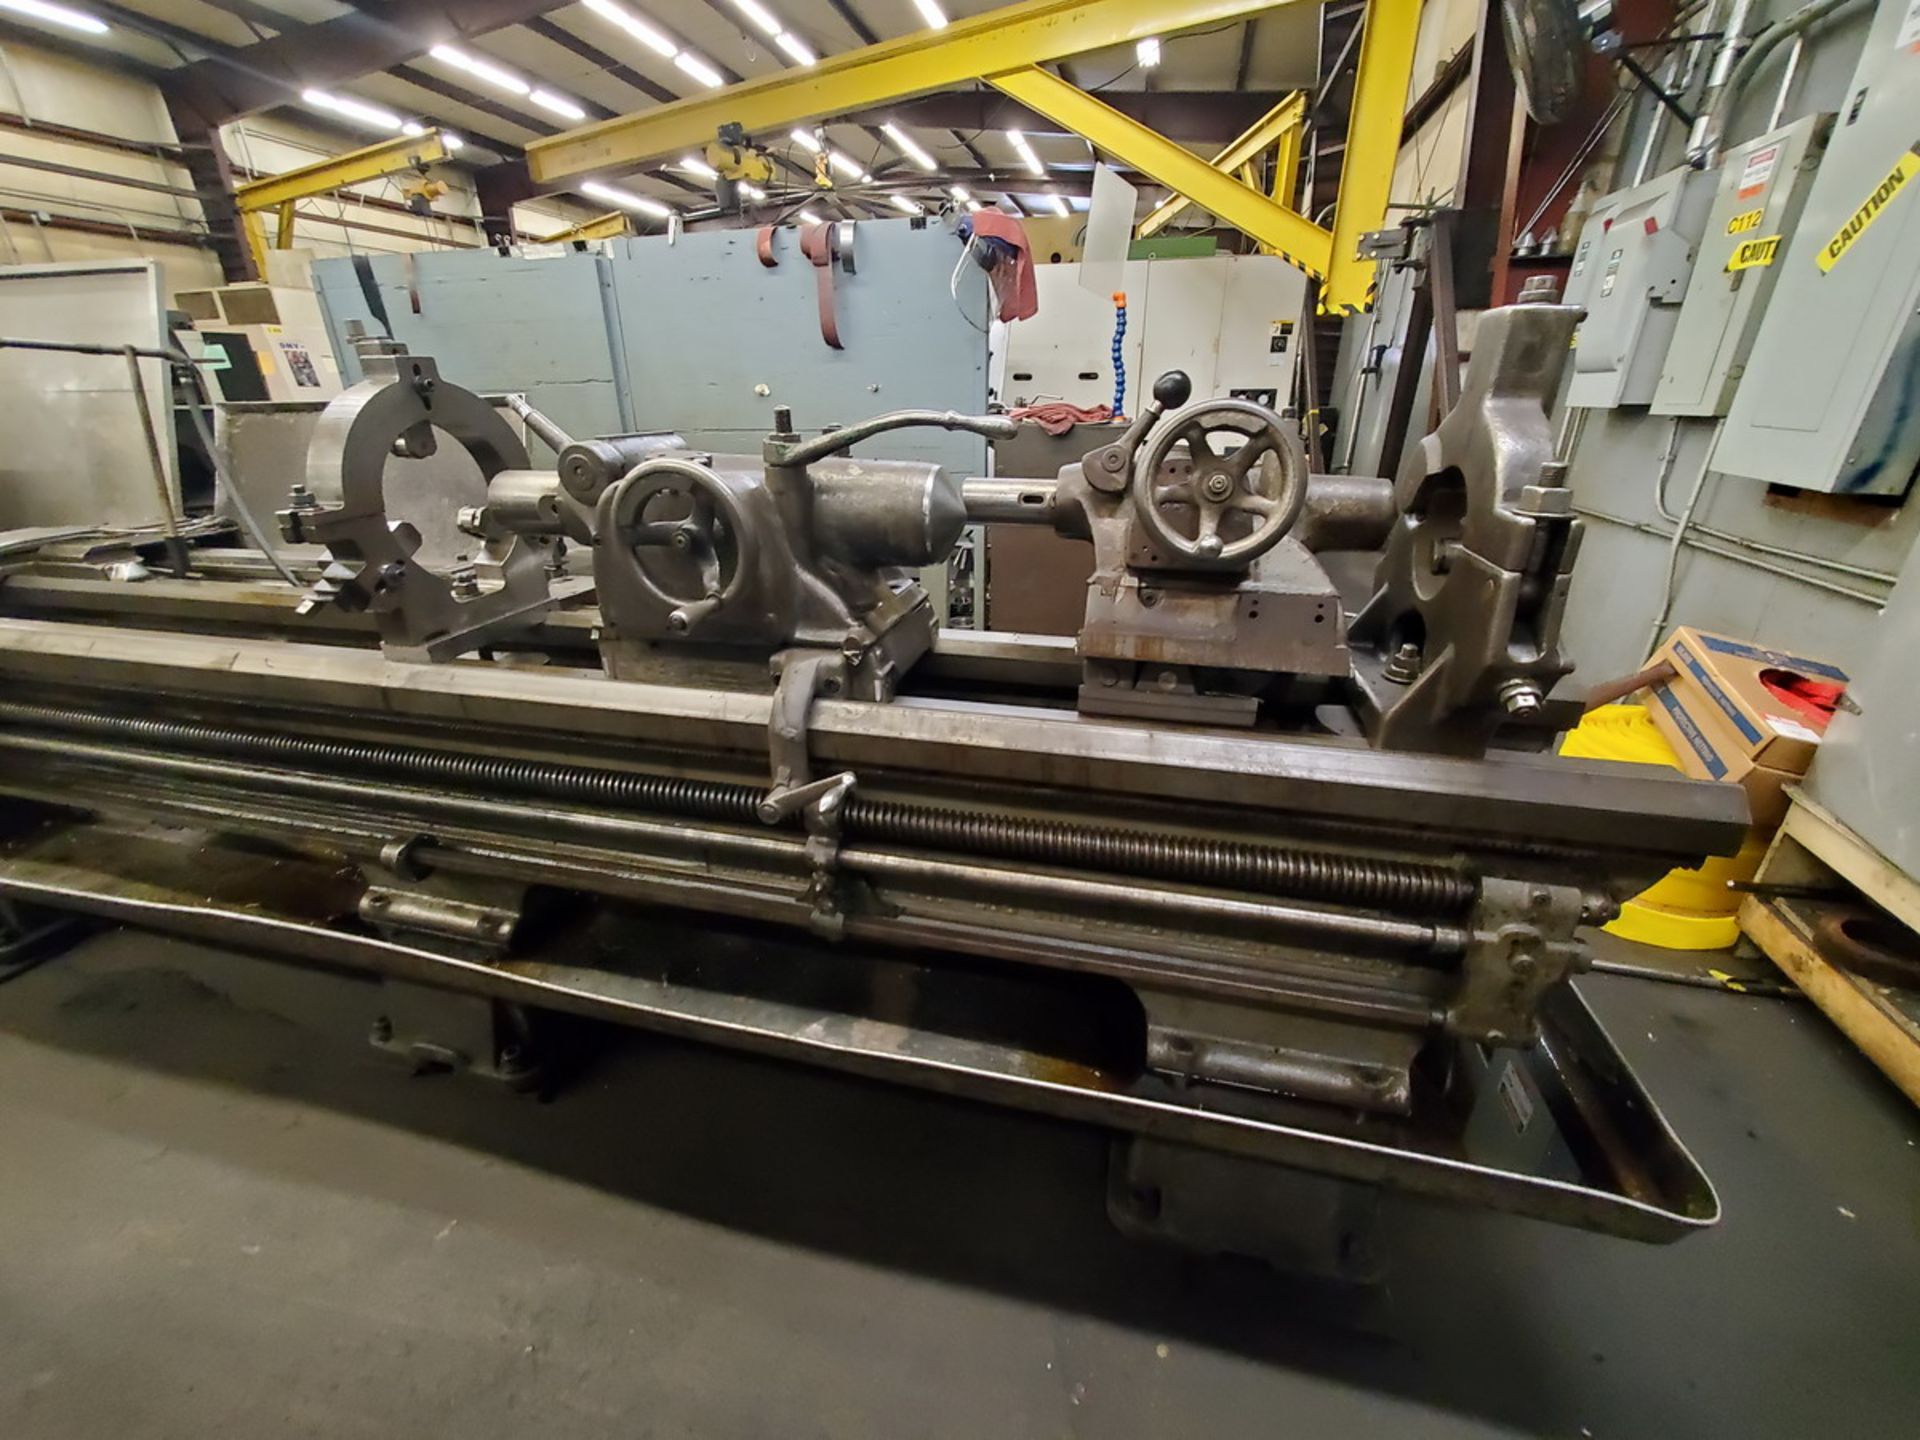 Axelson 20 18" Manual Lathe (Opening bid Includes Rigging Fee) - Image 3 of 13